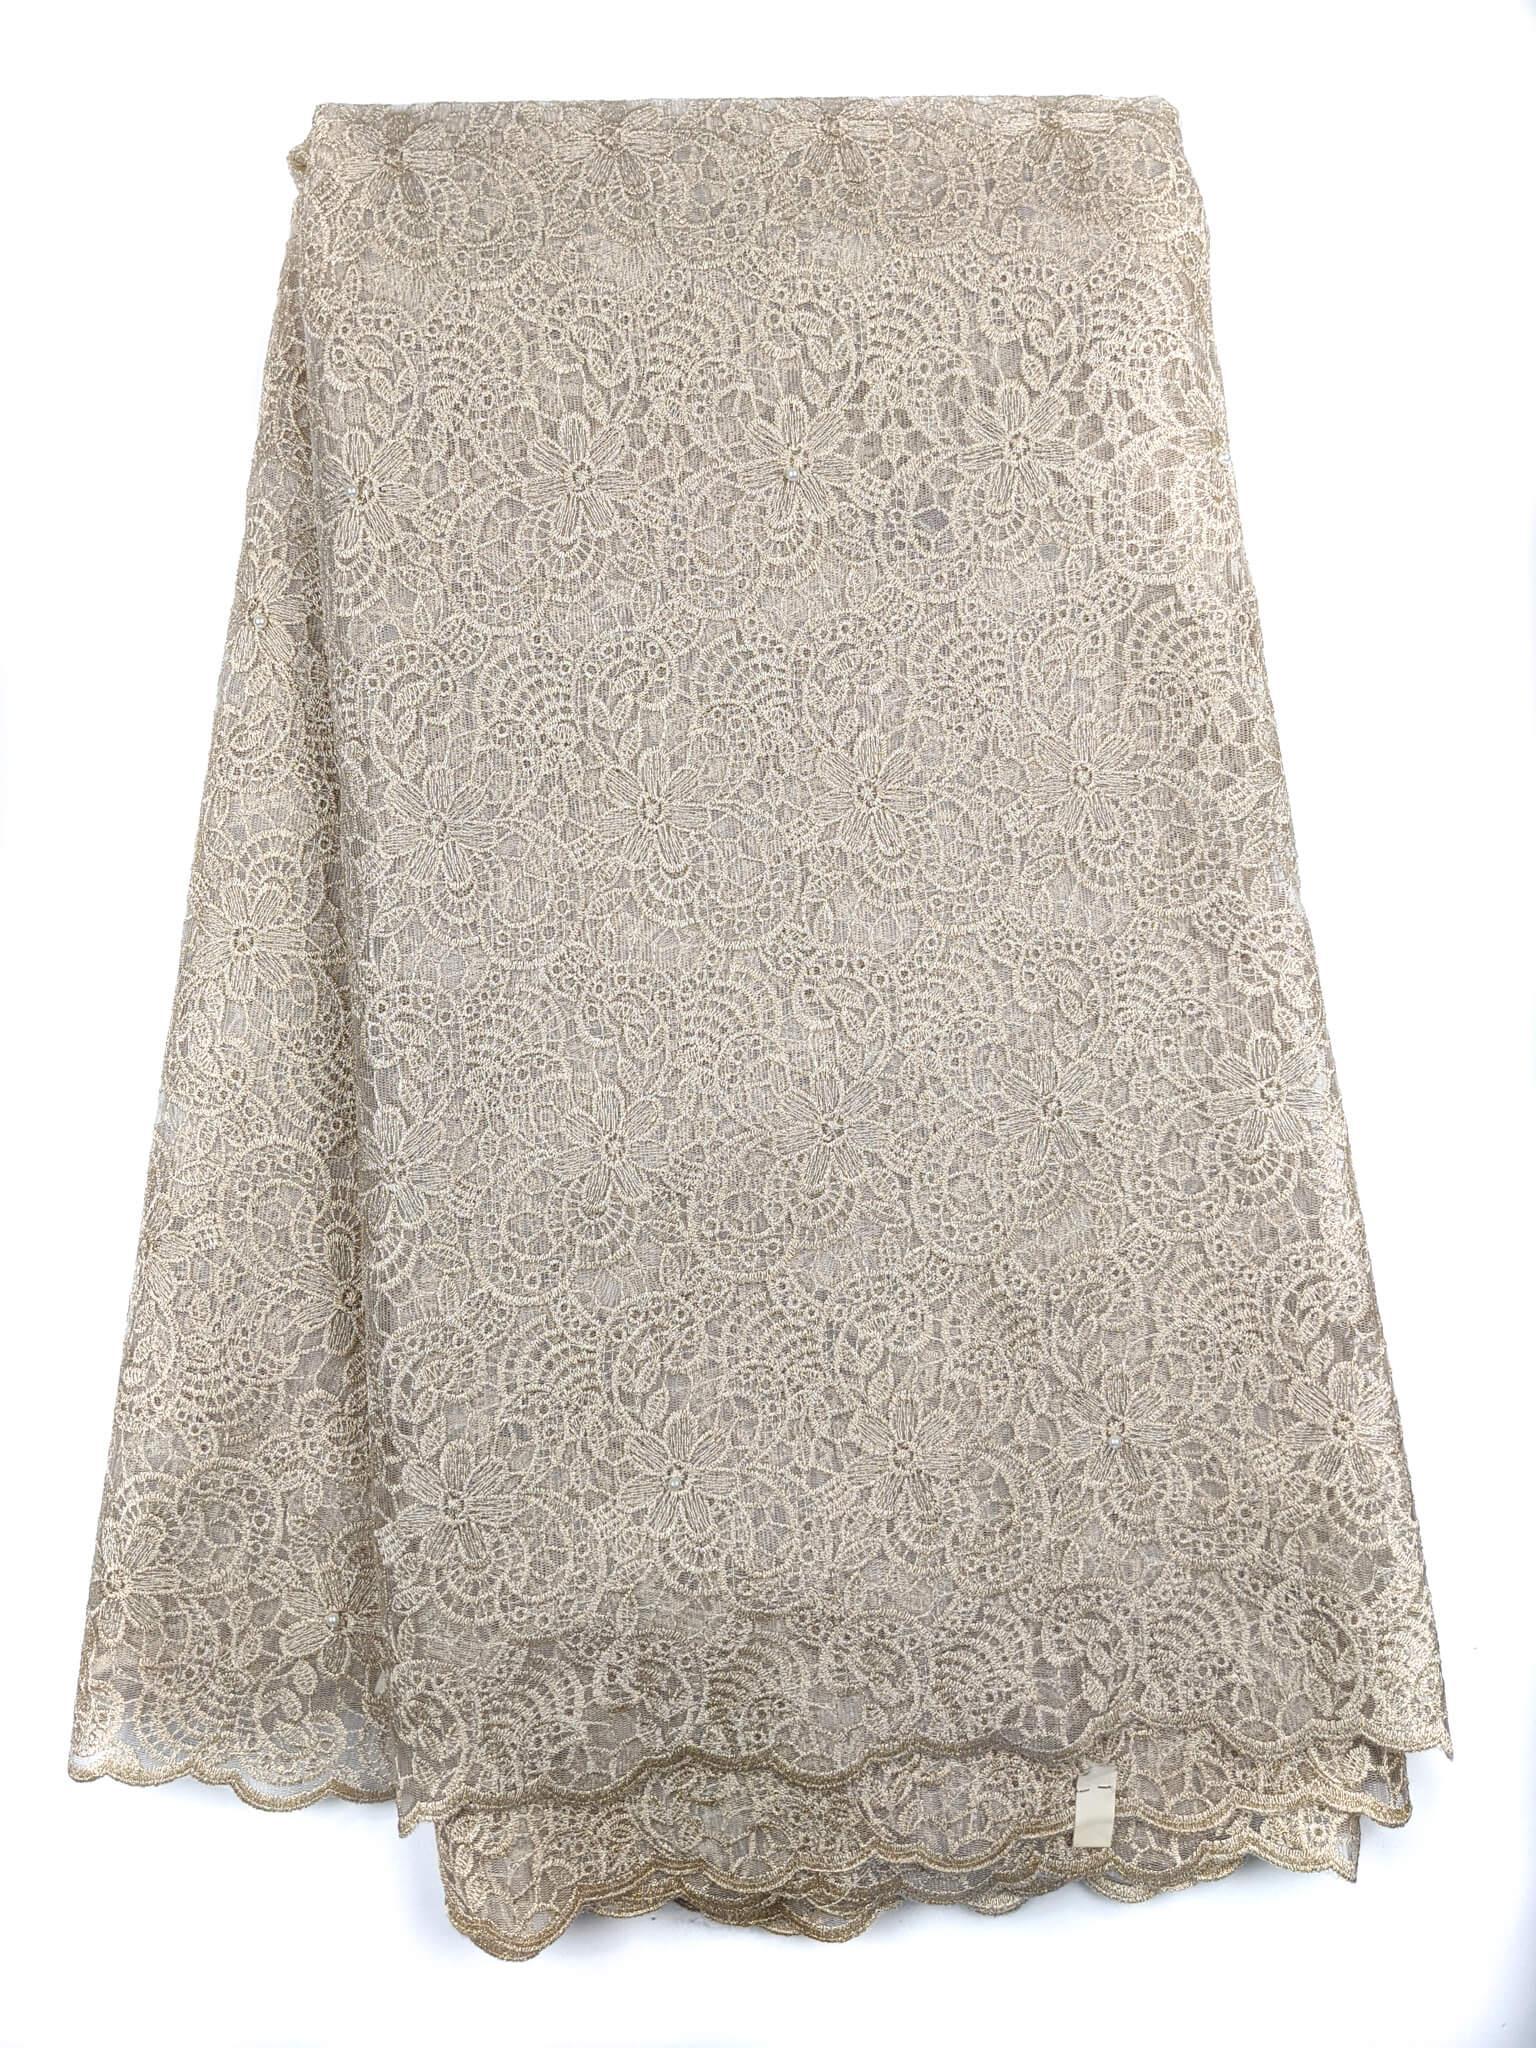 Gold French Lace